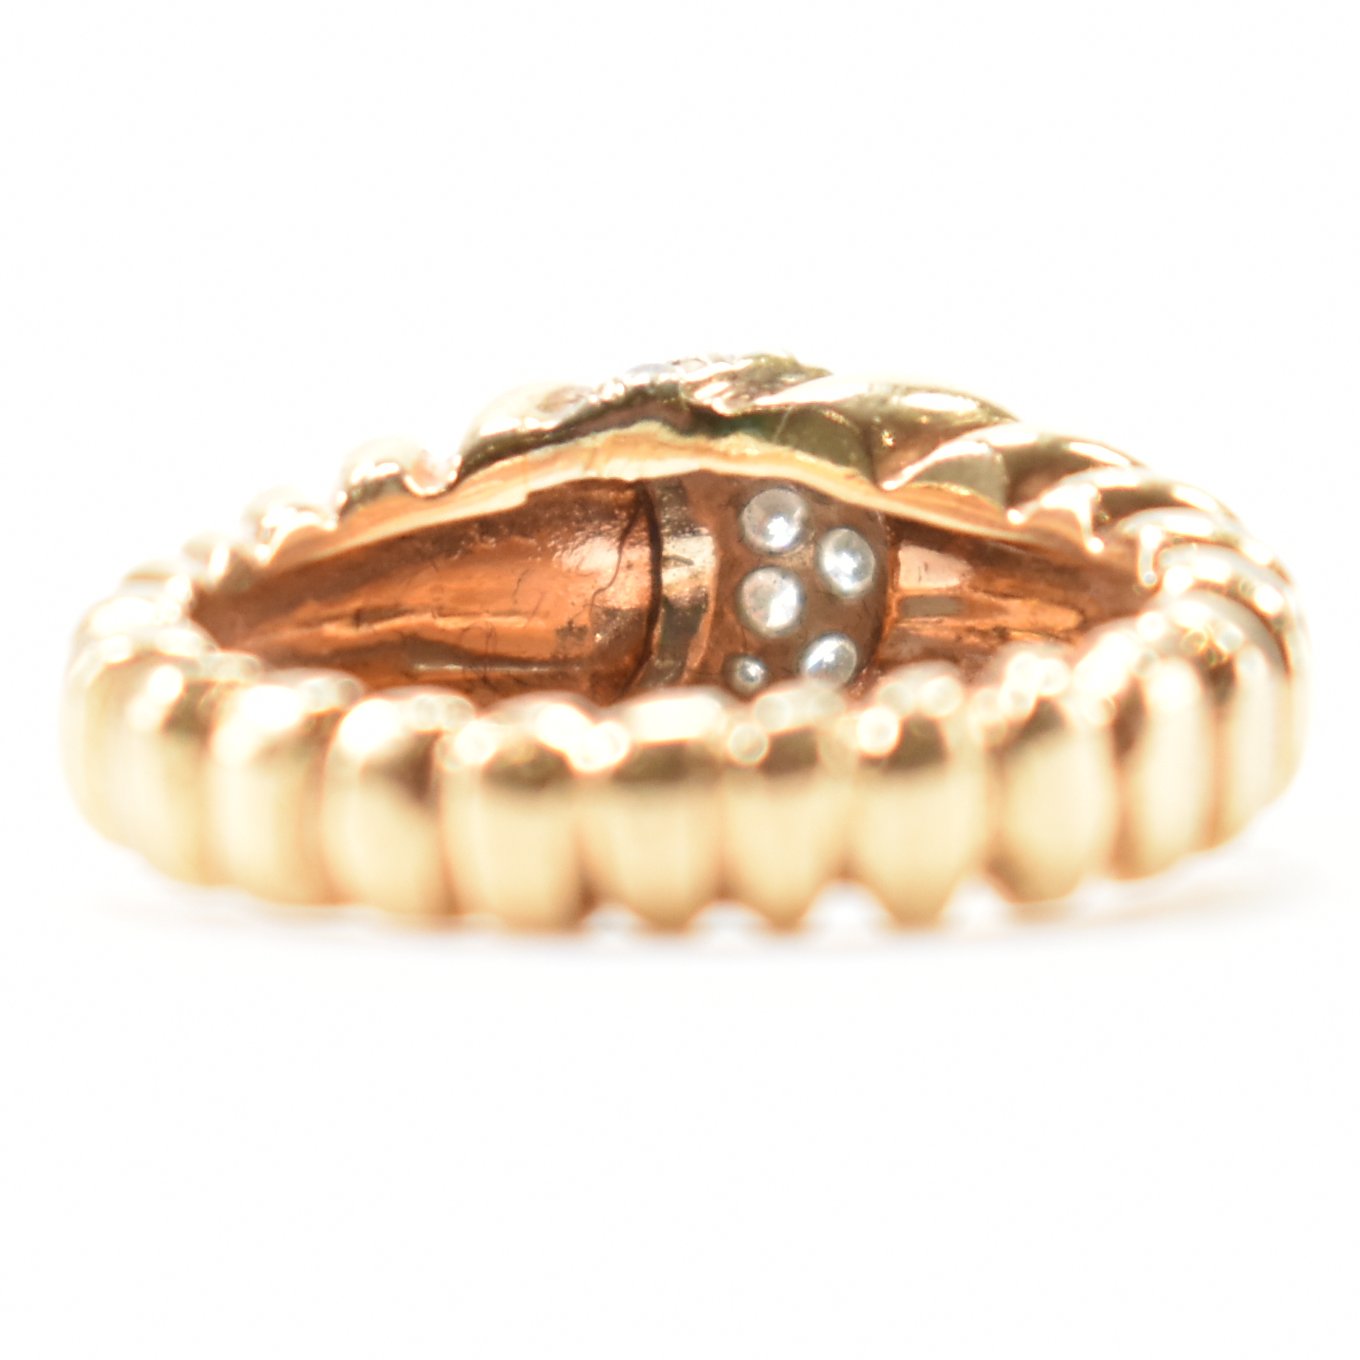 VINTAGE GOLD & DIAMOND REEDED BAND RING - Image 3 of 7